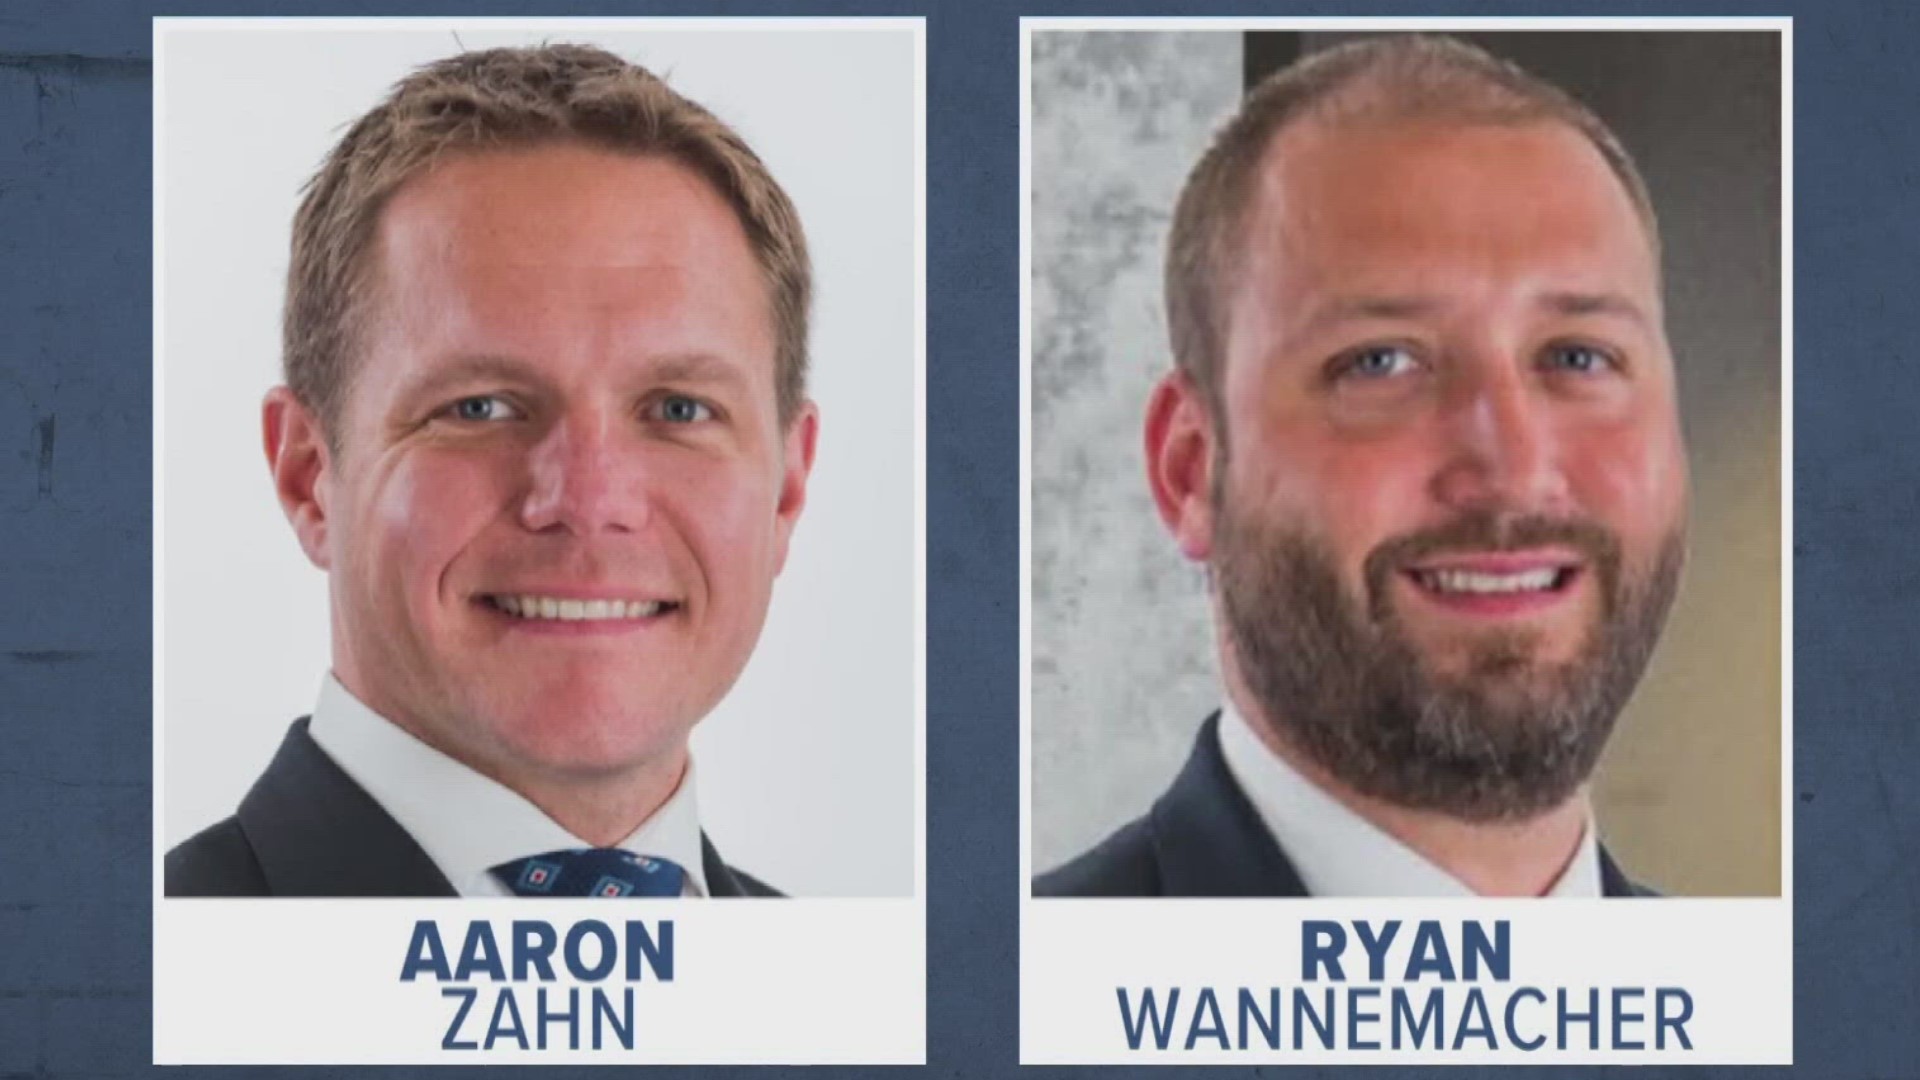 The federal trial of Aaron Zahn and Ryan Wannamacher begins Wednesday morning. They're accused in what has been called the largest fraud case in Jacksonville history